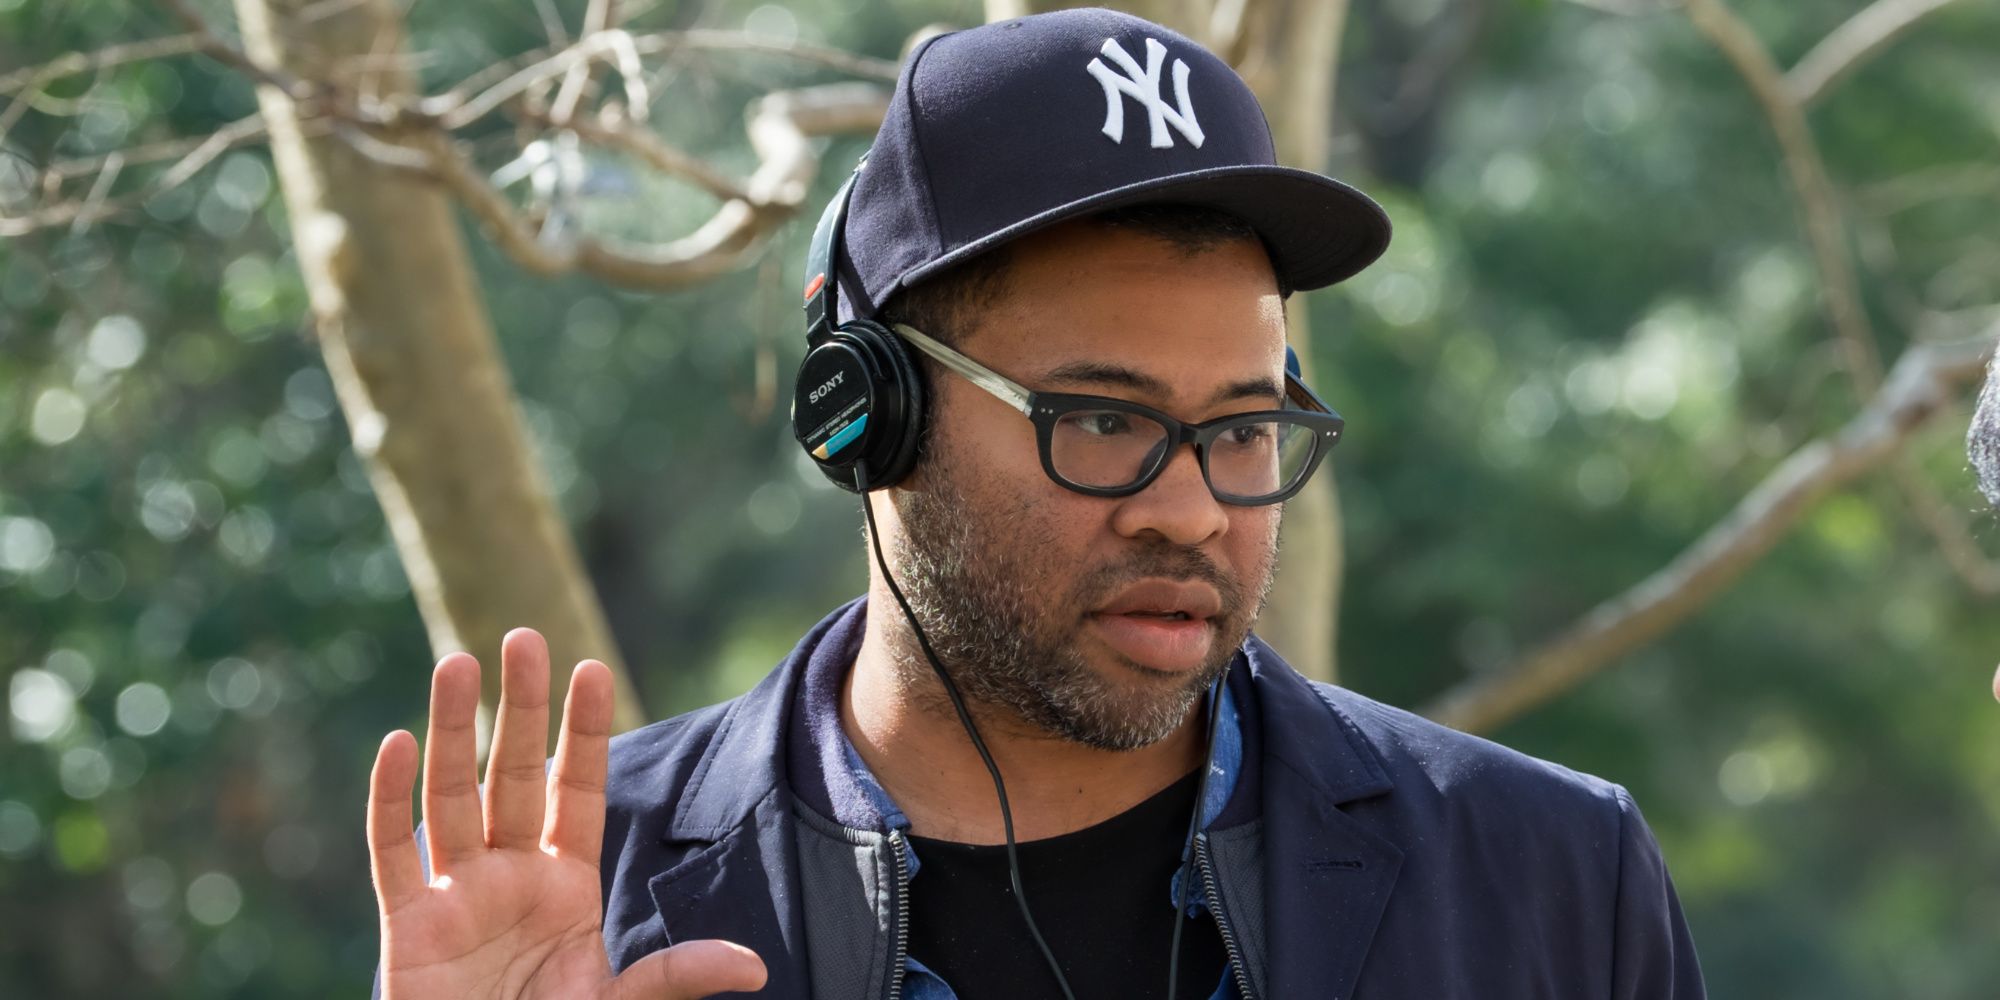 Jordan Peele directing on the set of Get Out